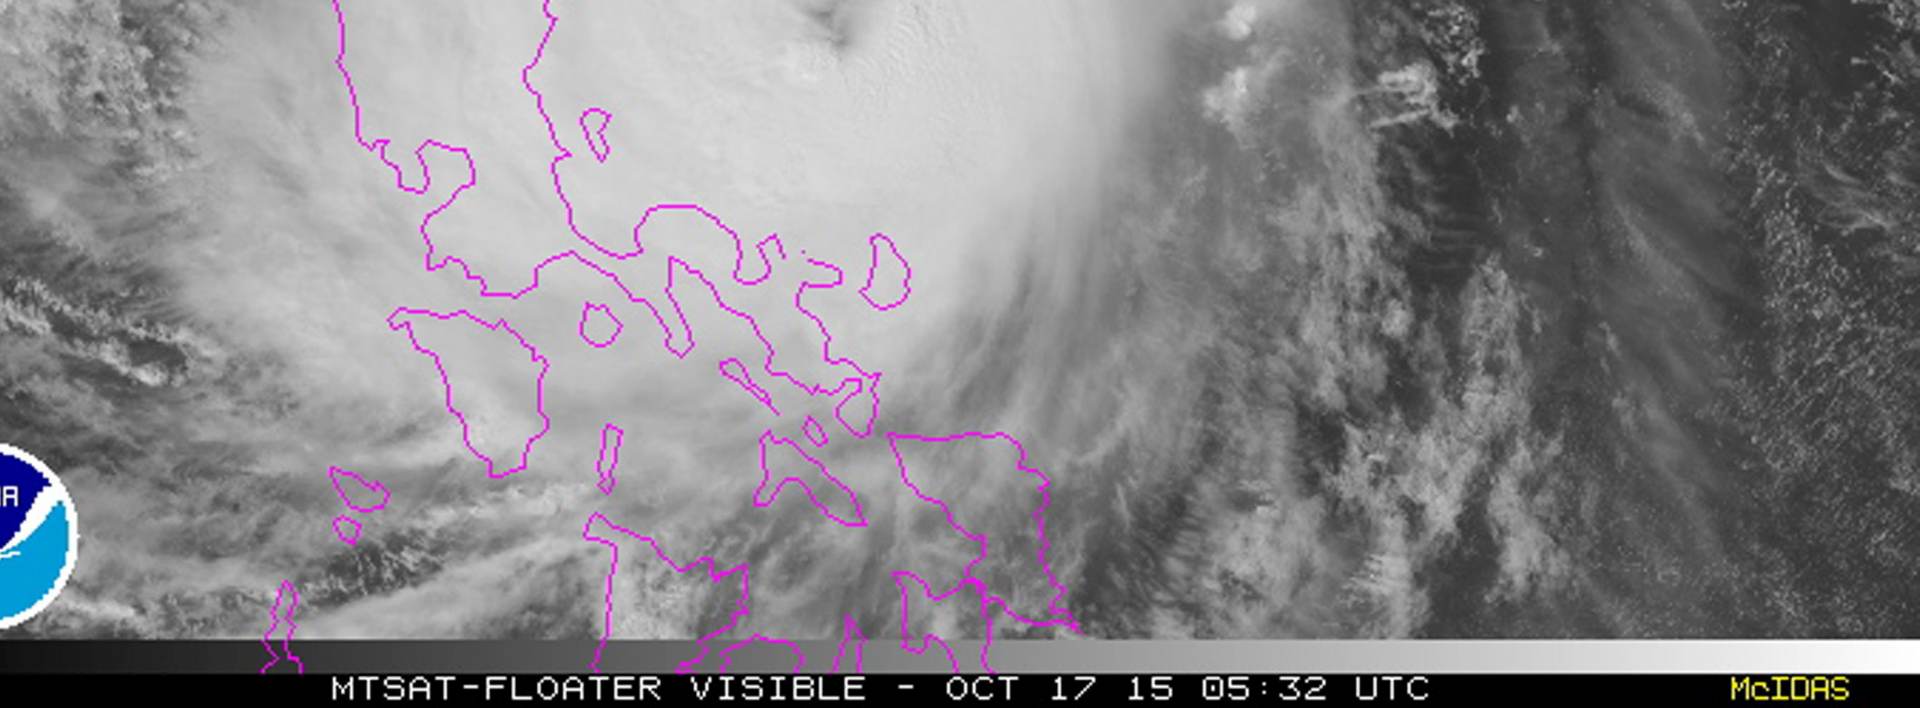 epa04980574 A handout photo made available on the website of the National Oceanic and Atmospheric Administration (NOAA) on 17 October 2015 shows a satellite image of the visible floater of typhoon Koppu as it advances the coastline (L) of the Philippines on 17 October 2015. Typhoon Koppu strengthened as it swirled closer to the Philippines 17 October, dumping heavy rains over a wide area in the country's north-eastern coast, the weather bureau said. More than two dozen domestic flights were cancelled, while boat travel had been suspended amid choppy seas. Storm signal warnings were raised for nearly 30 provinces, including Manila.  EPA/NOAA / HANDOUT  HANDOUT EDITORIAL USE ONLY